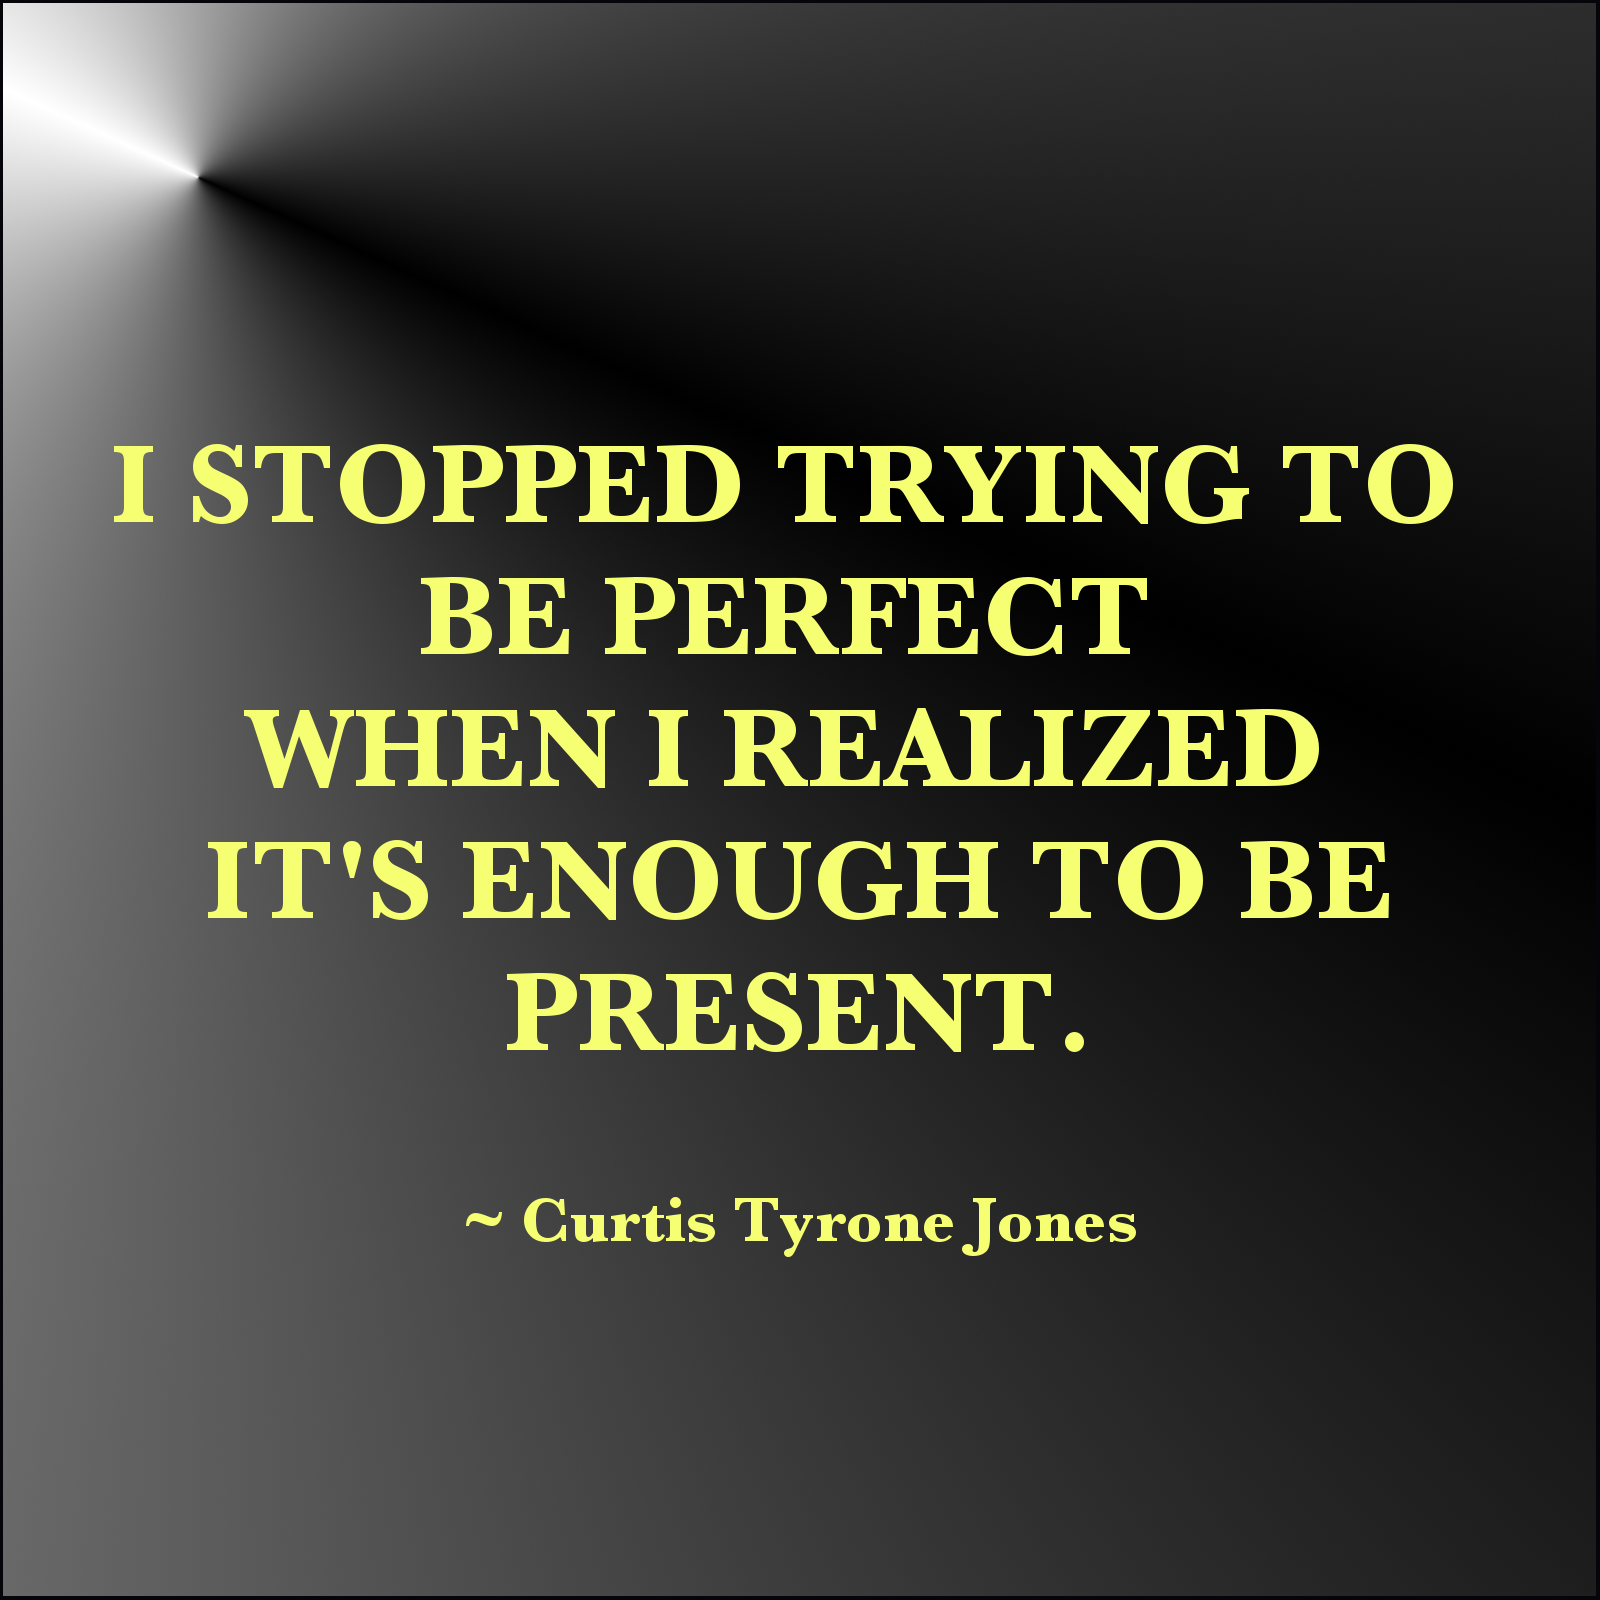 I stopped trying to be perfect when I realized it’s enough to be present. Curtis Tyrone Jones